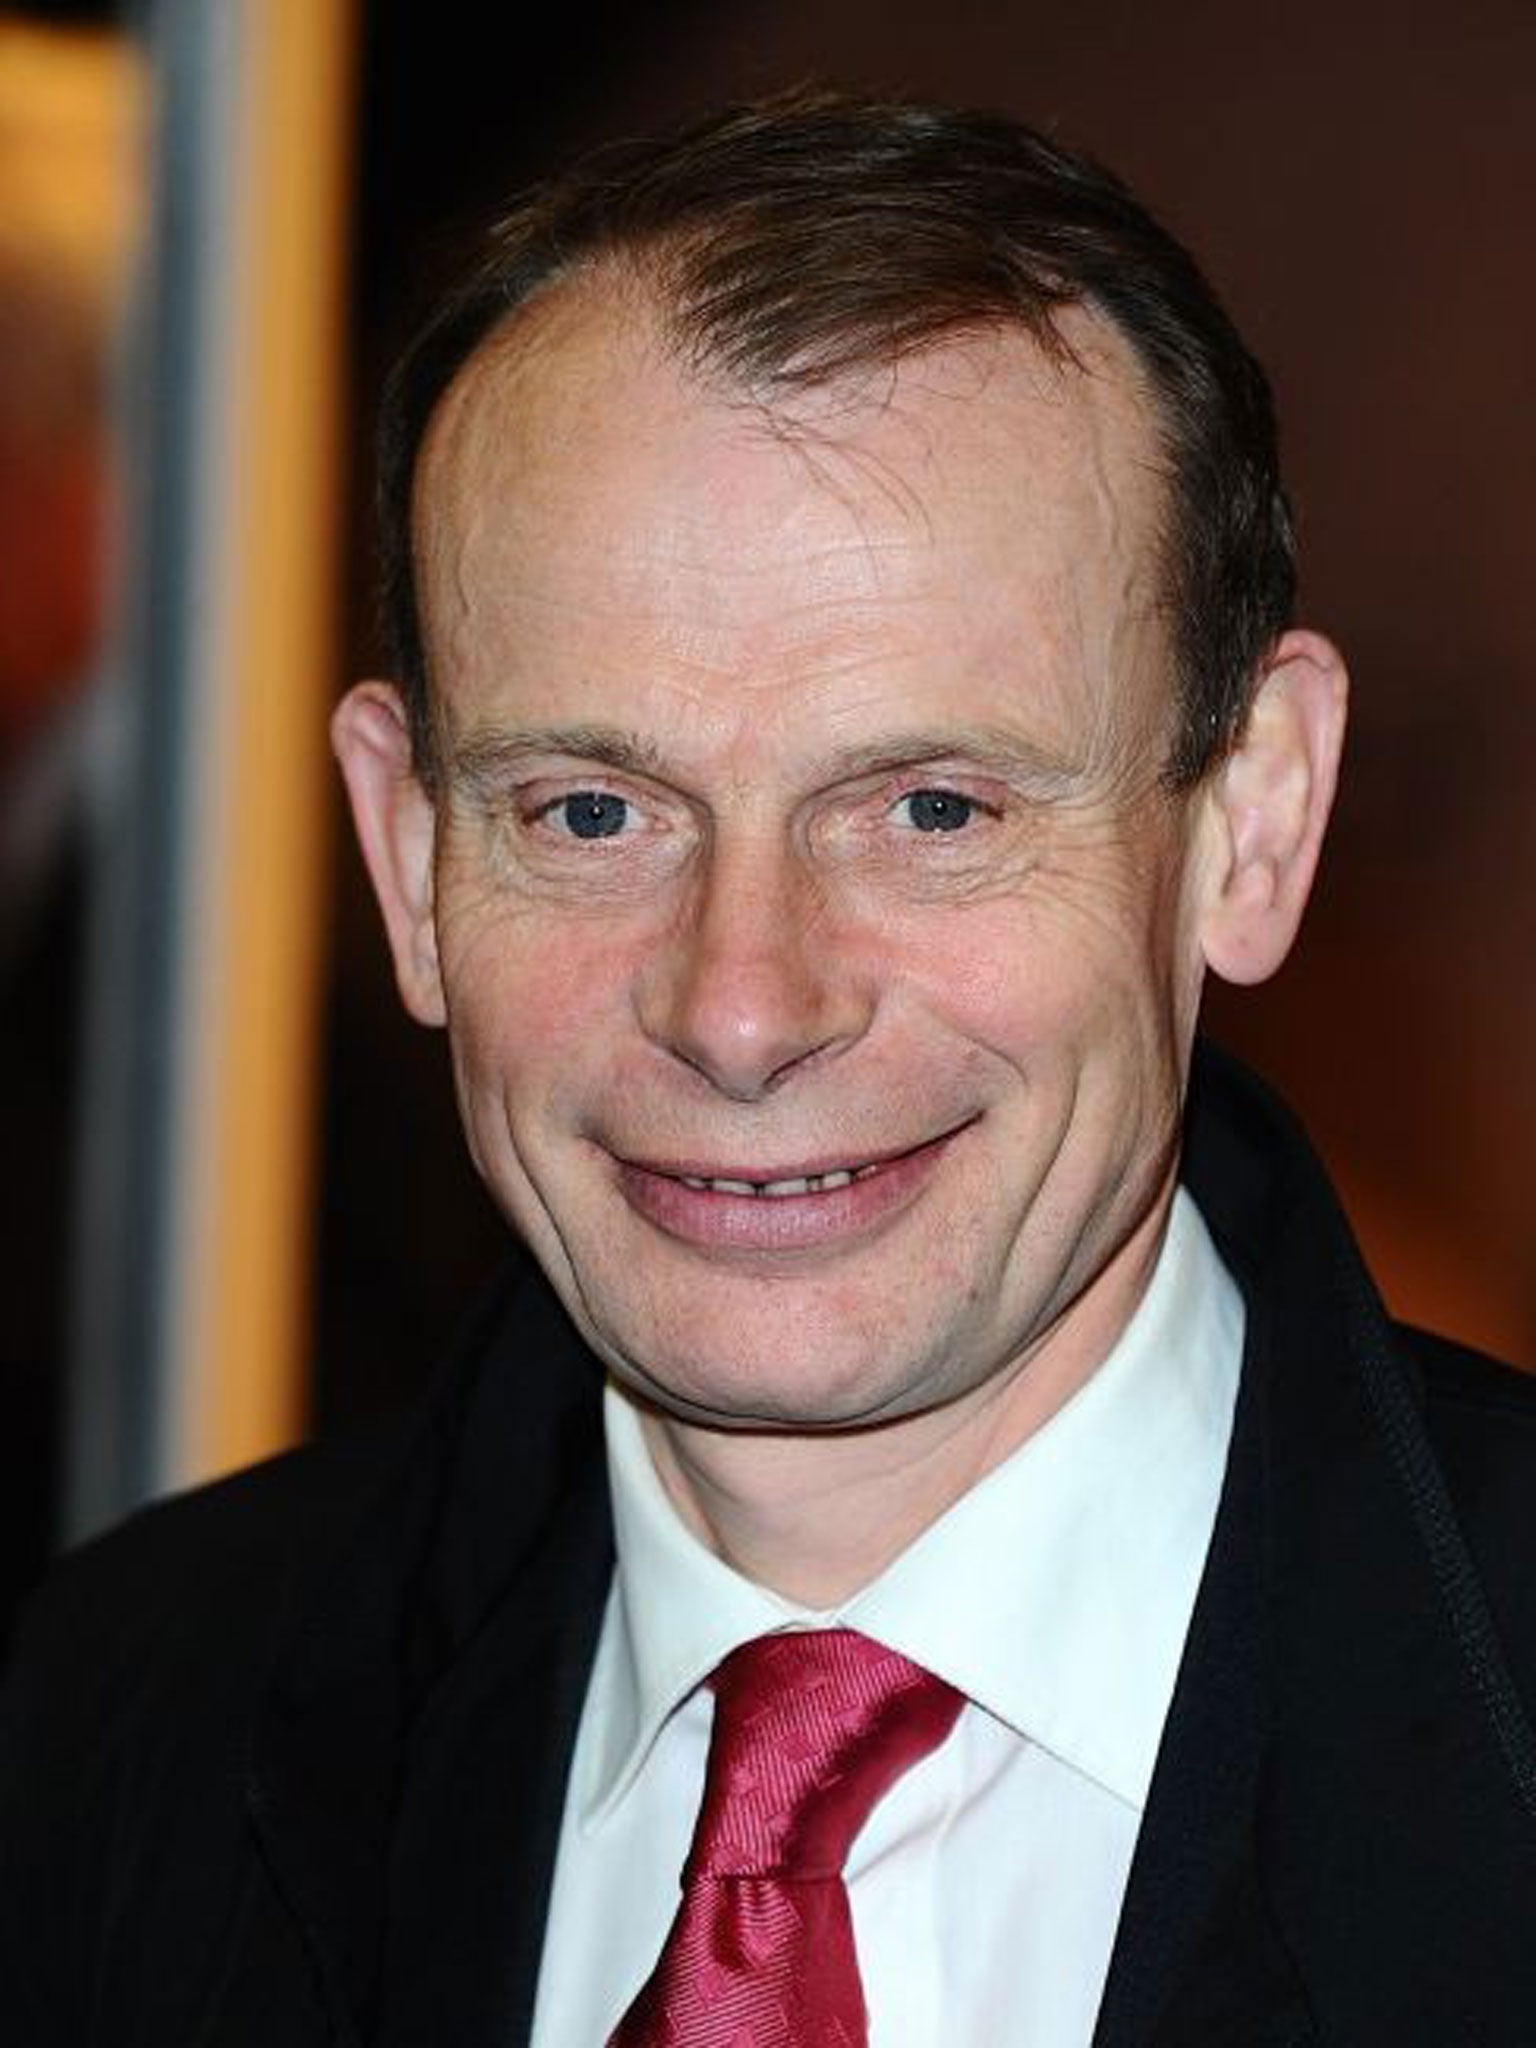 Andrew Marr is preparing to make a full television comeback in September